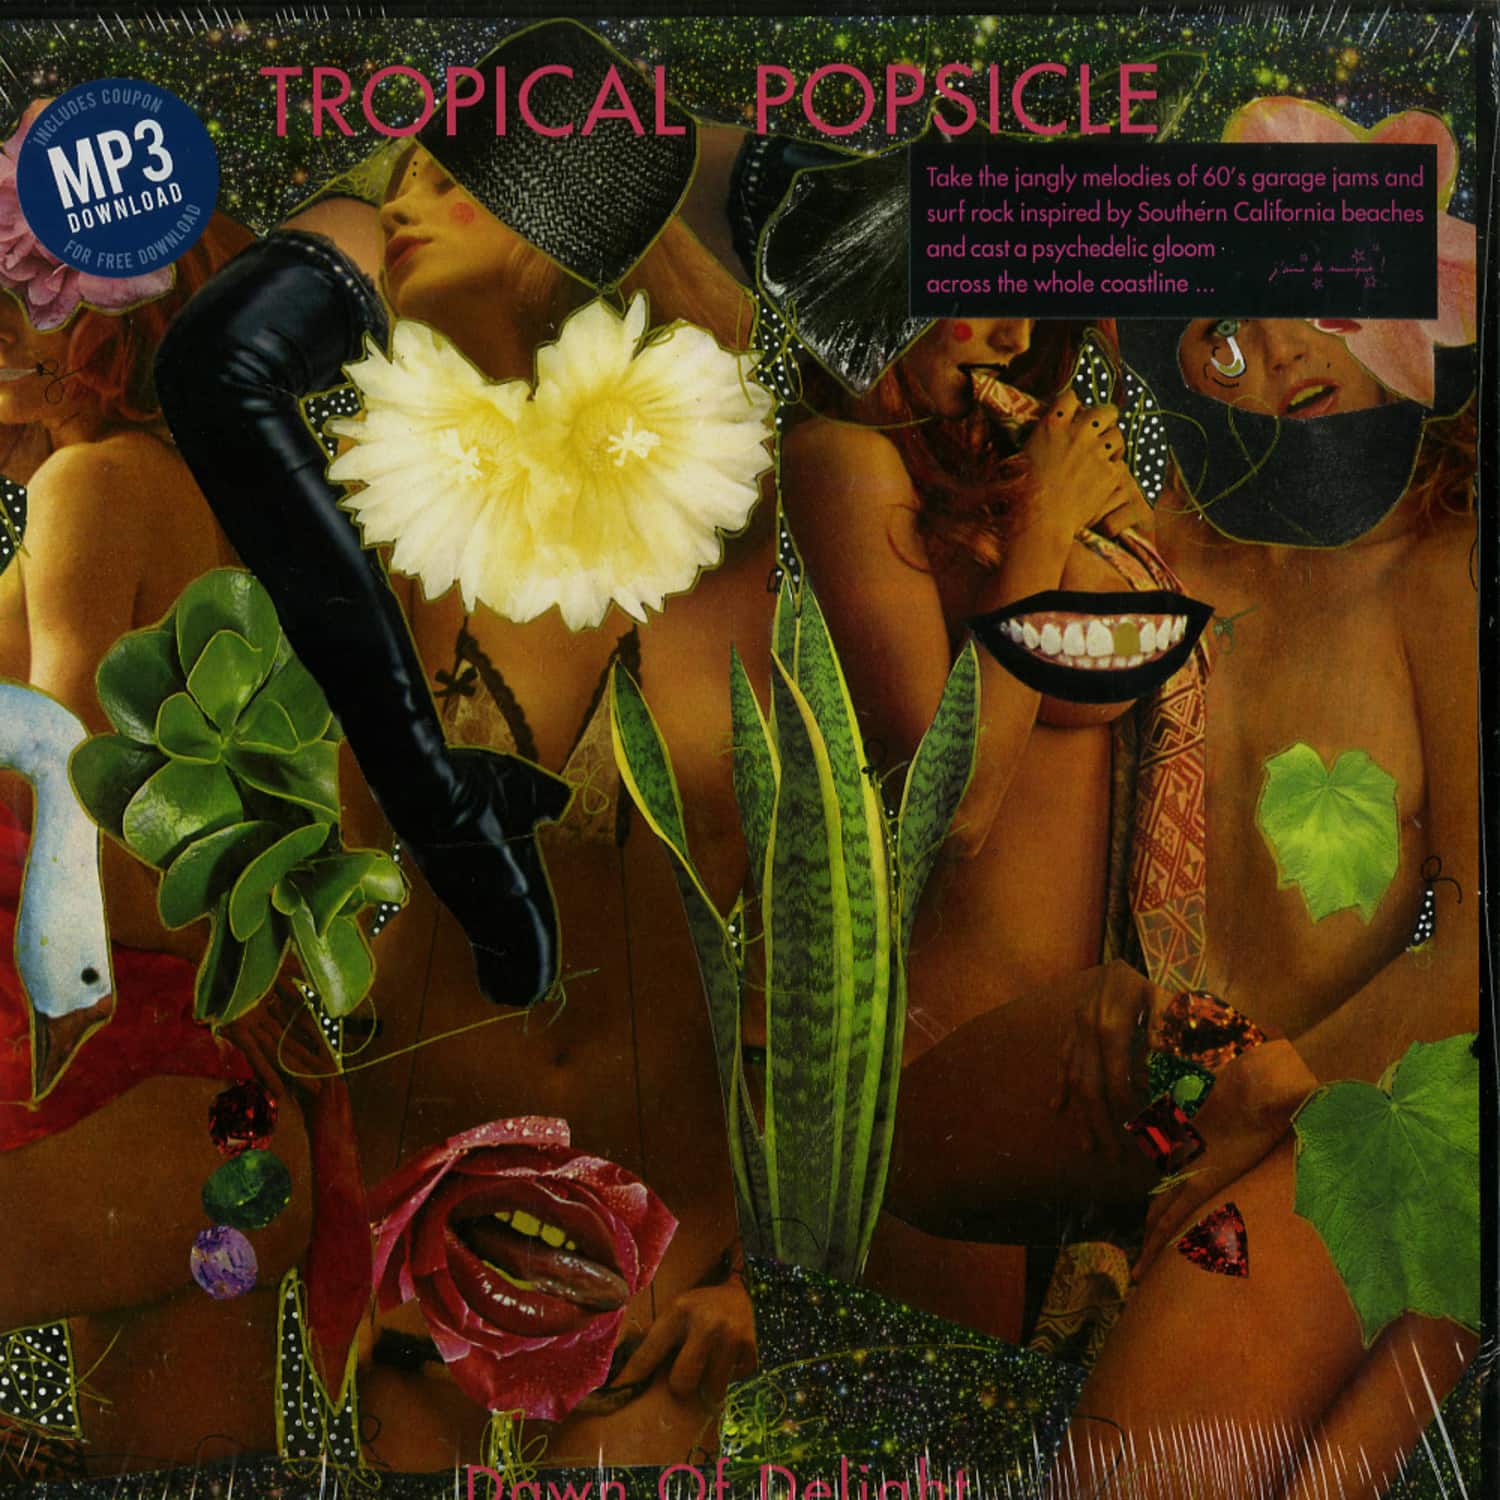 Tropical Popsicle - DAWN OF DELIGHT 